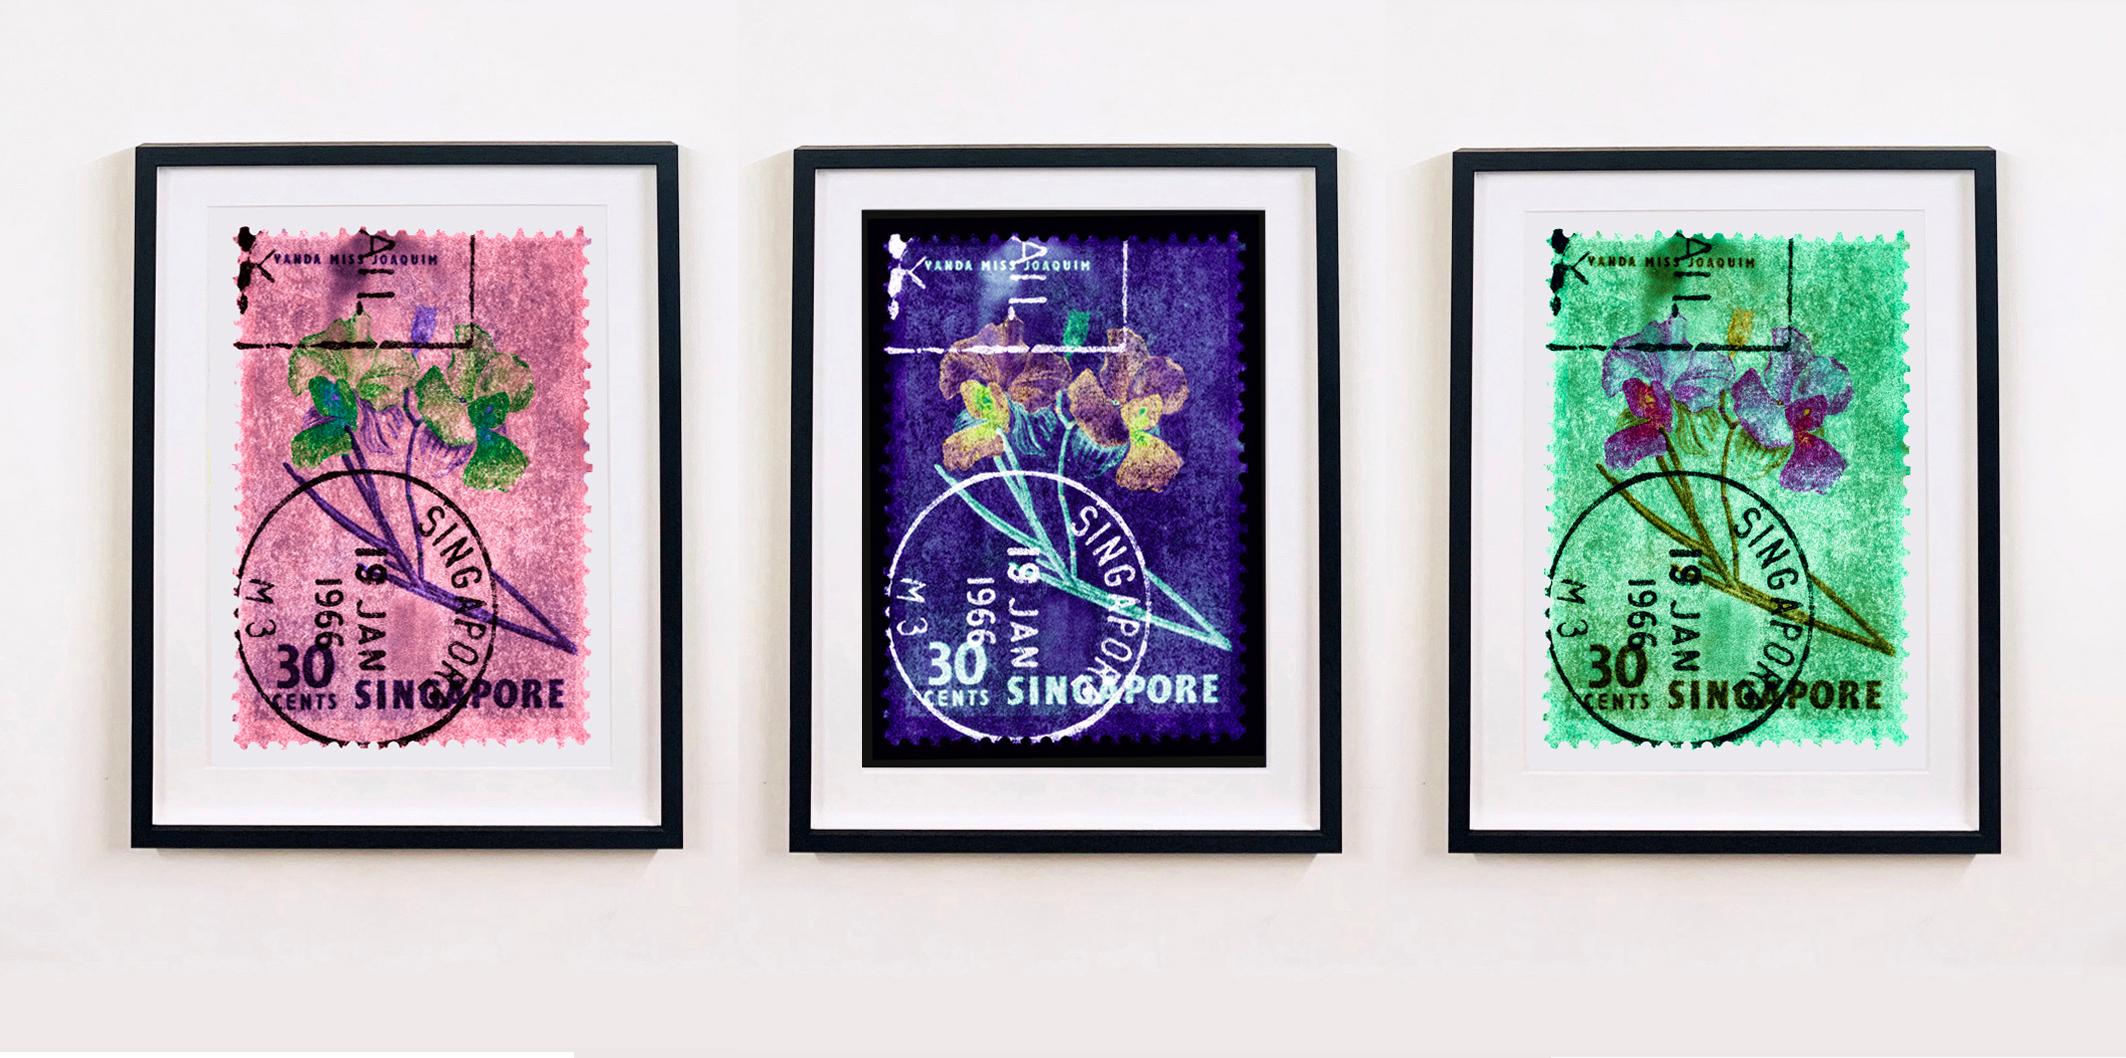 Singapore Stamp Collection, 30c Singapore Orchid Pink - Floral color photo - Conceptual Print by Heidler & Heeps